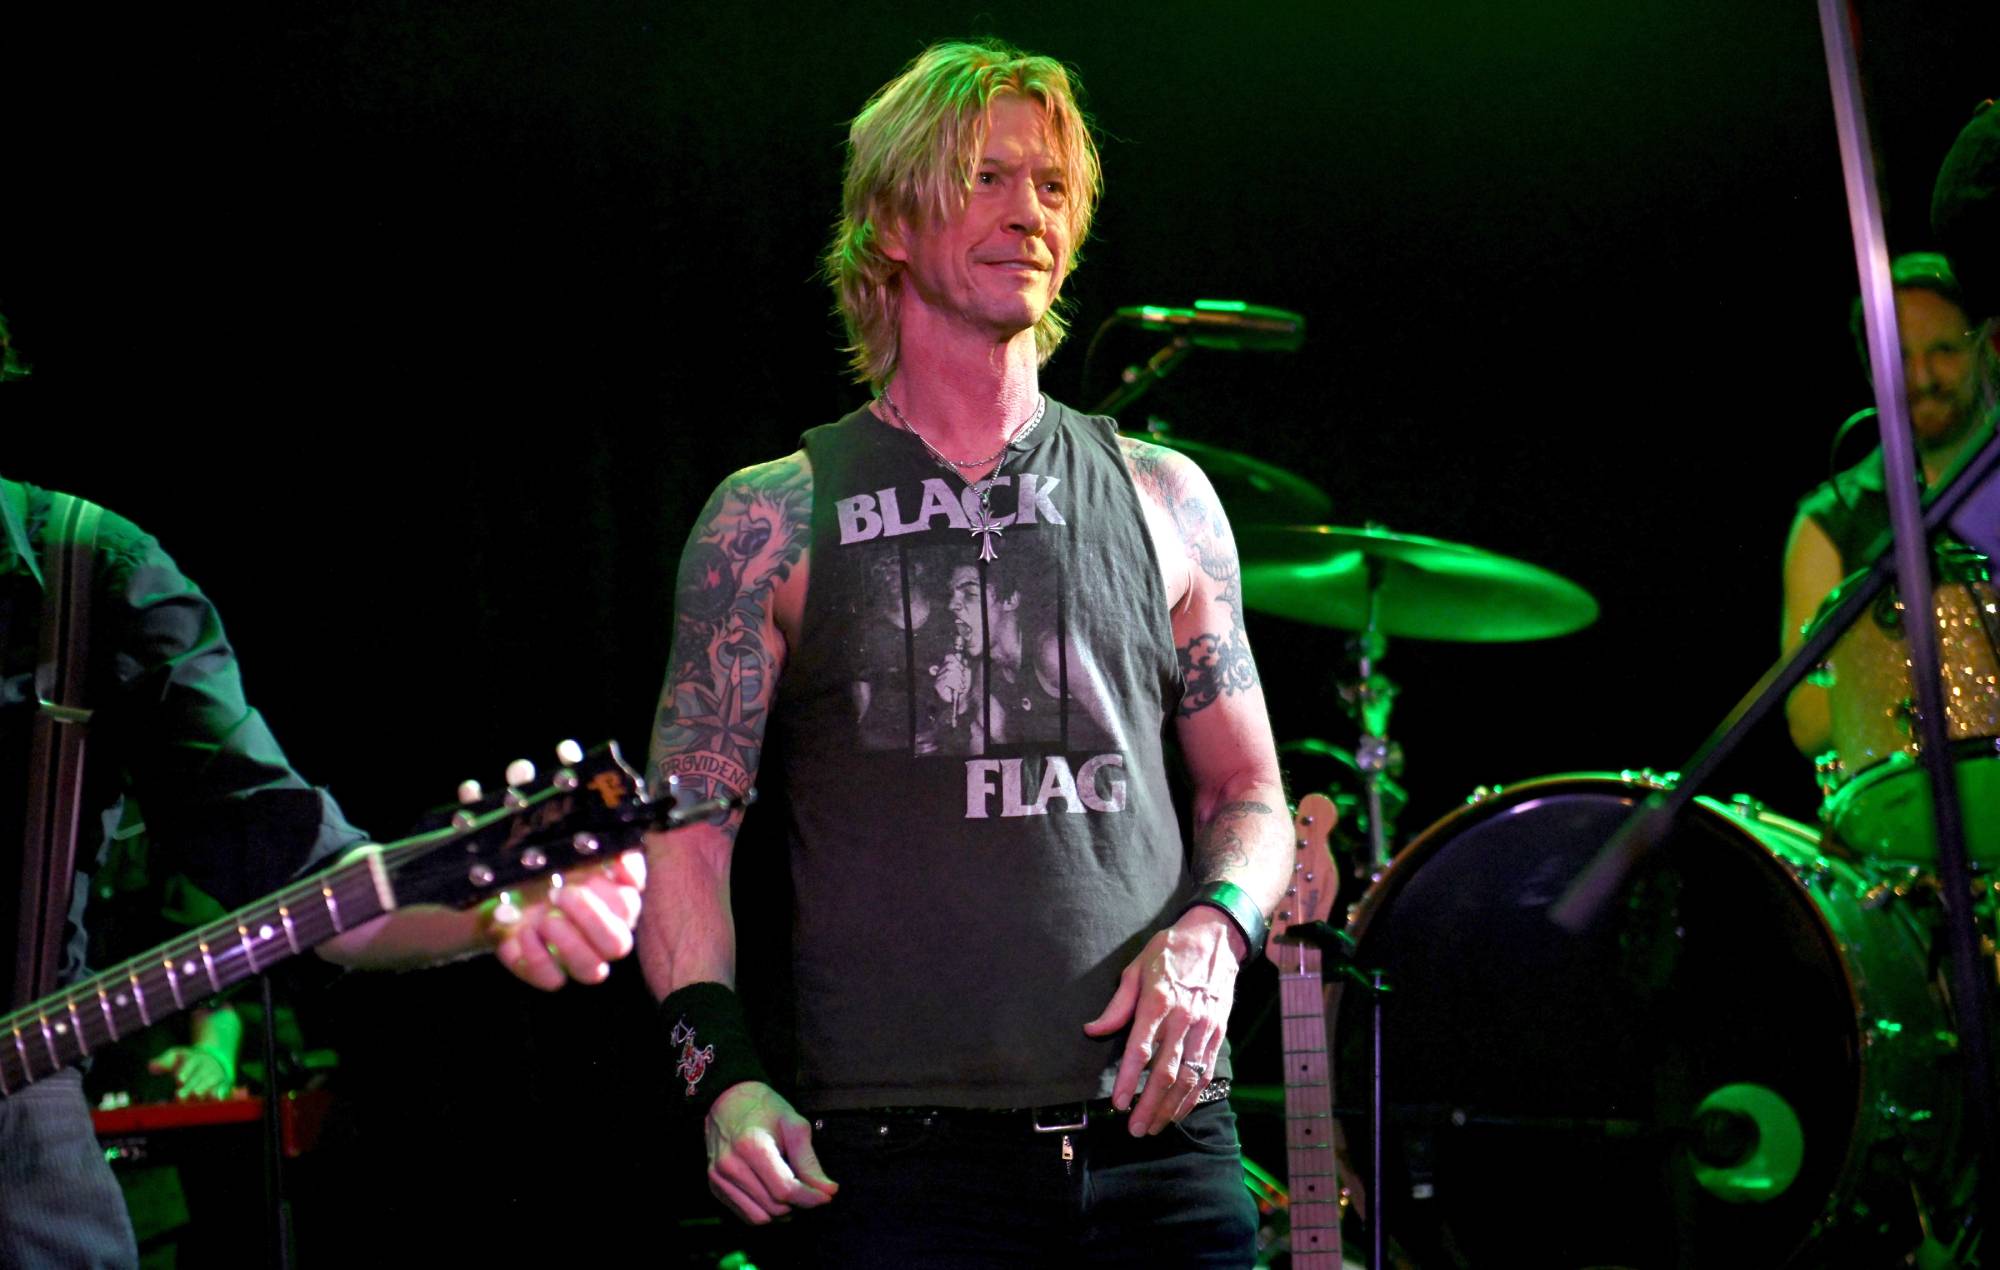 Guns N’ Roses’ Duff McKagan announces solo album with Iggy Pop, Slash, Jerry Cantrell and more